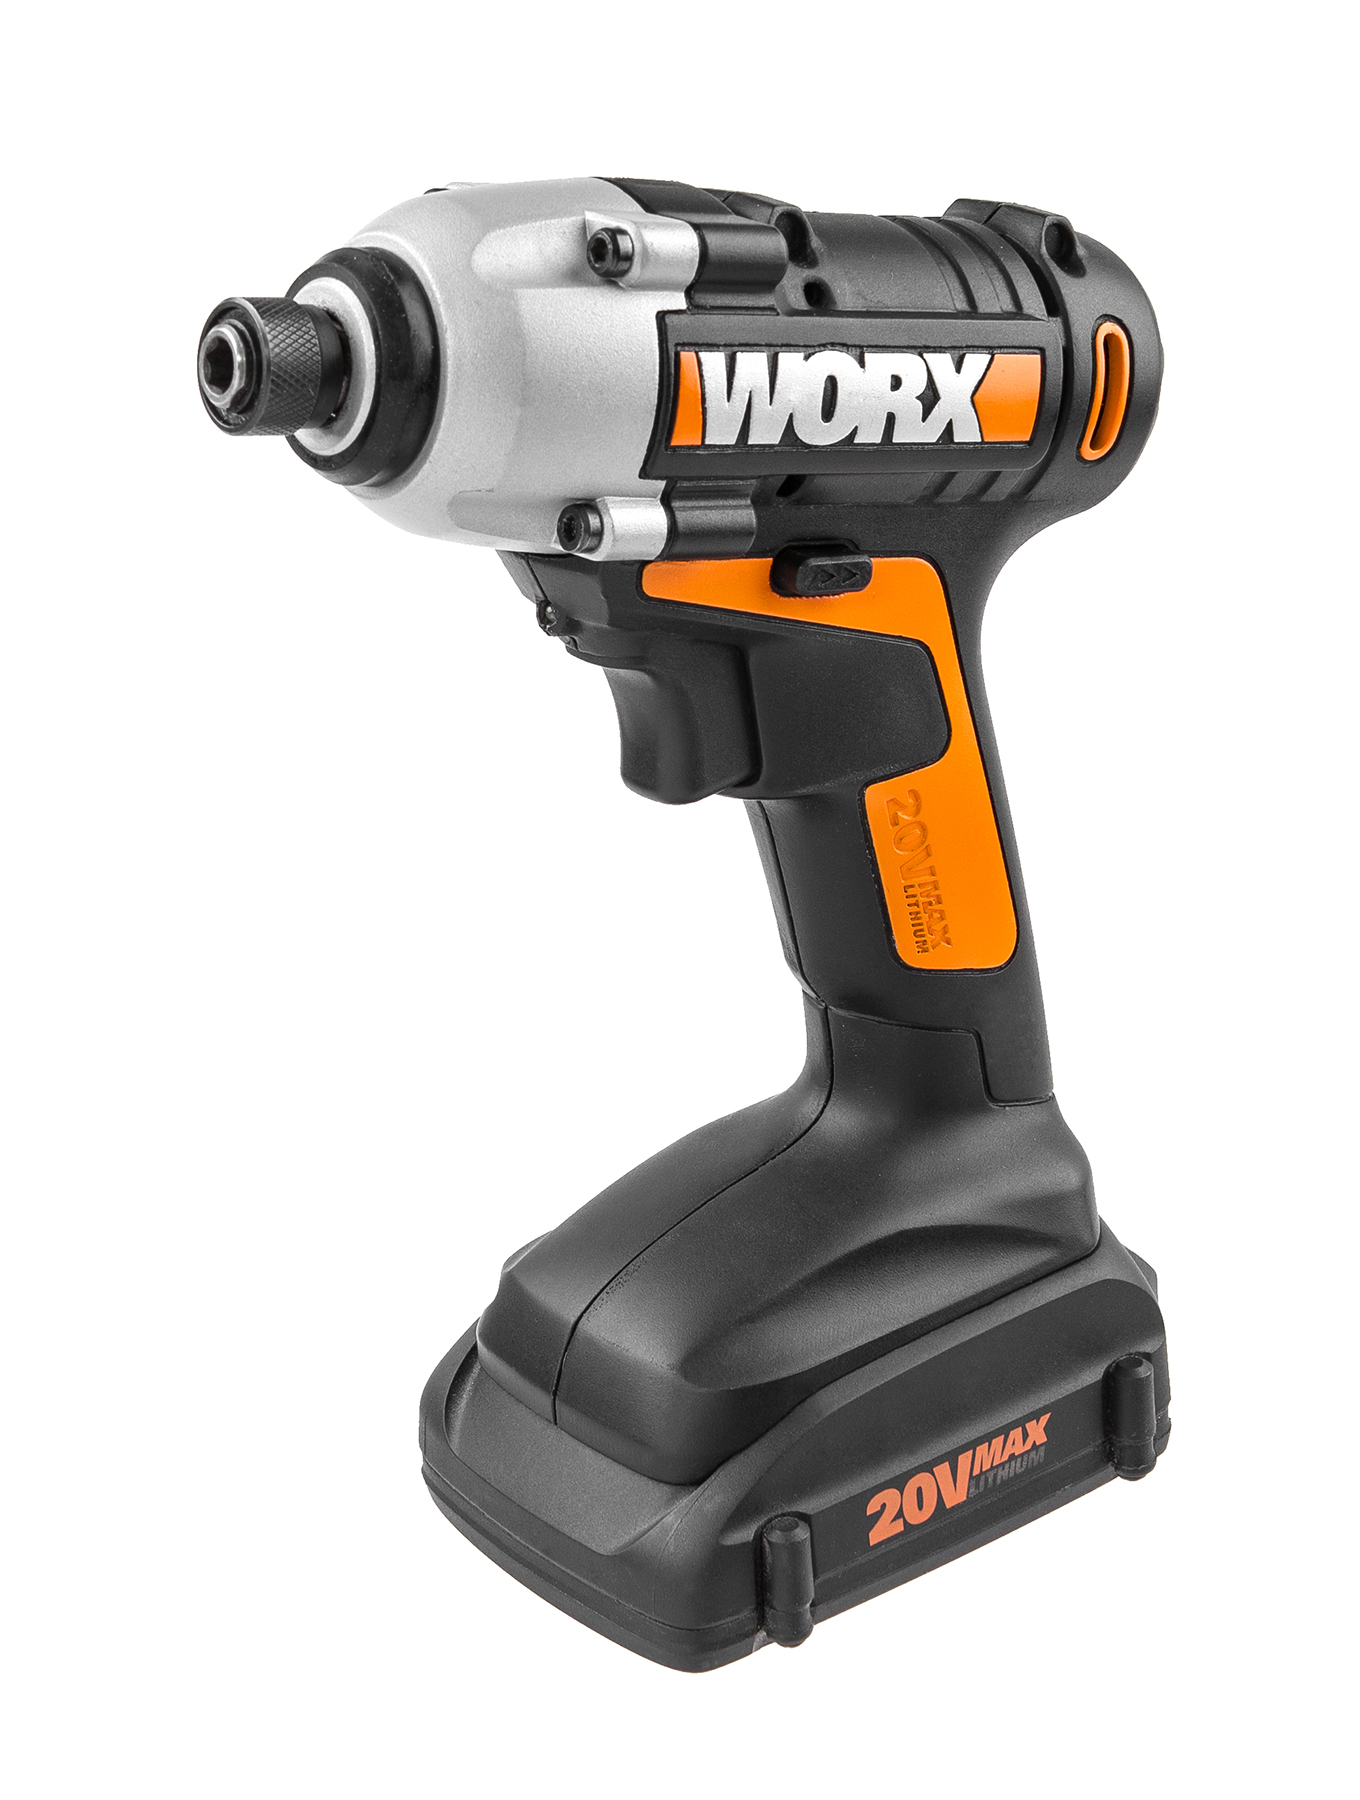 WORX WX944L 20v Drill & Impact Driver Combo Kit for sale online